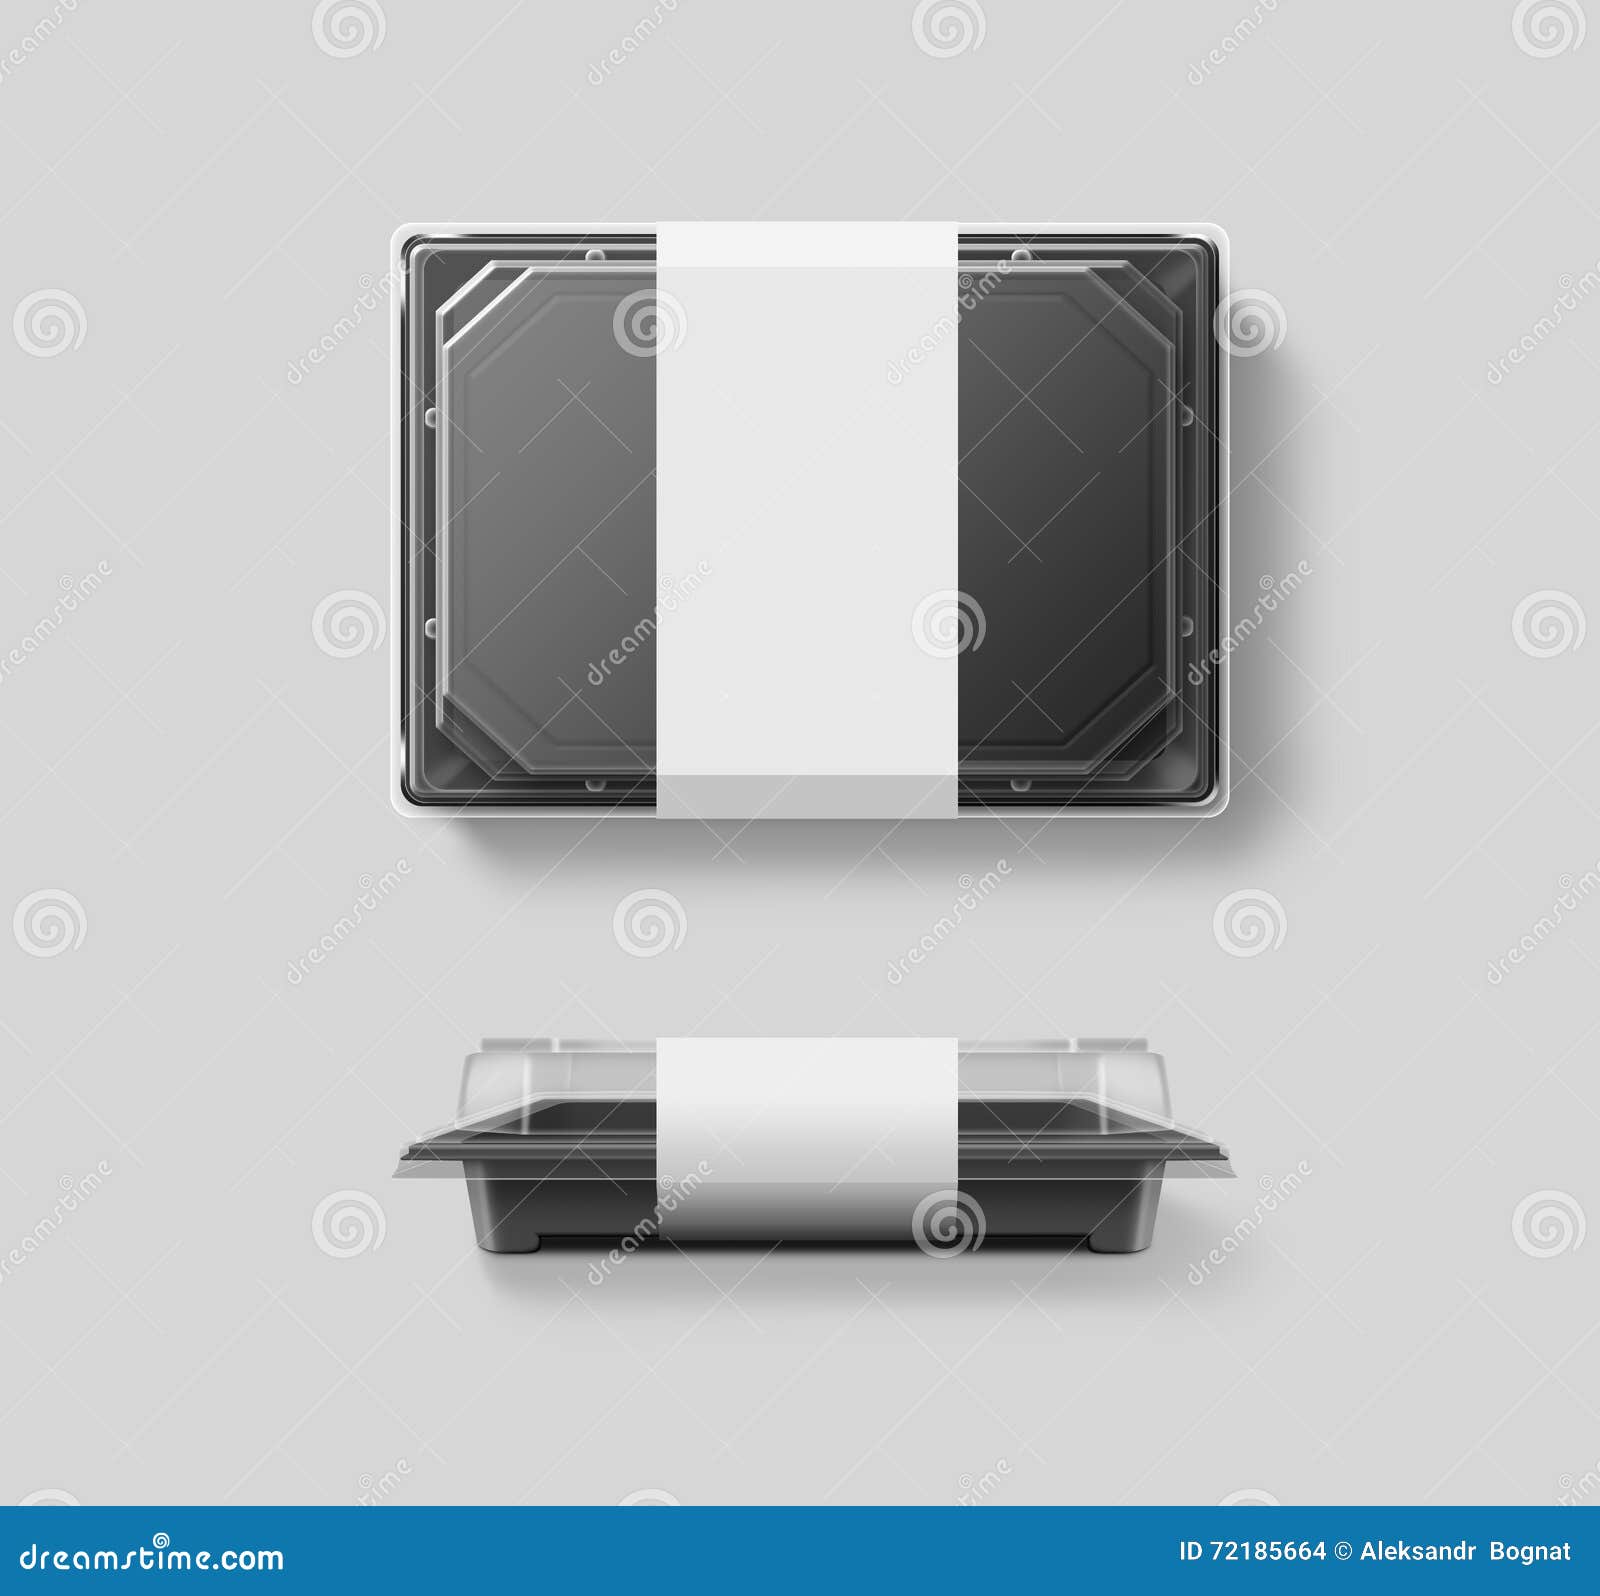 Download Blank Plastic Disposable Food Container Mockup Transparent Lid Isolated Stock Photo Image Of Black Container 72185664